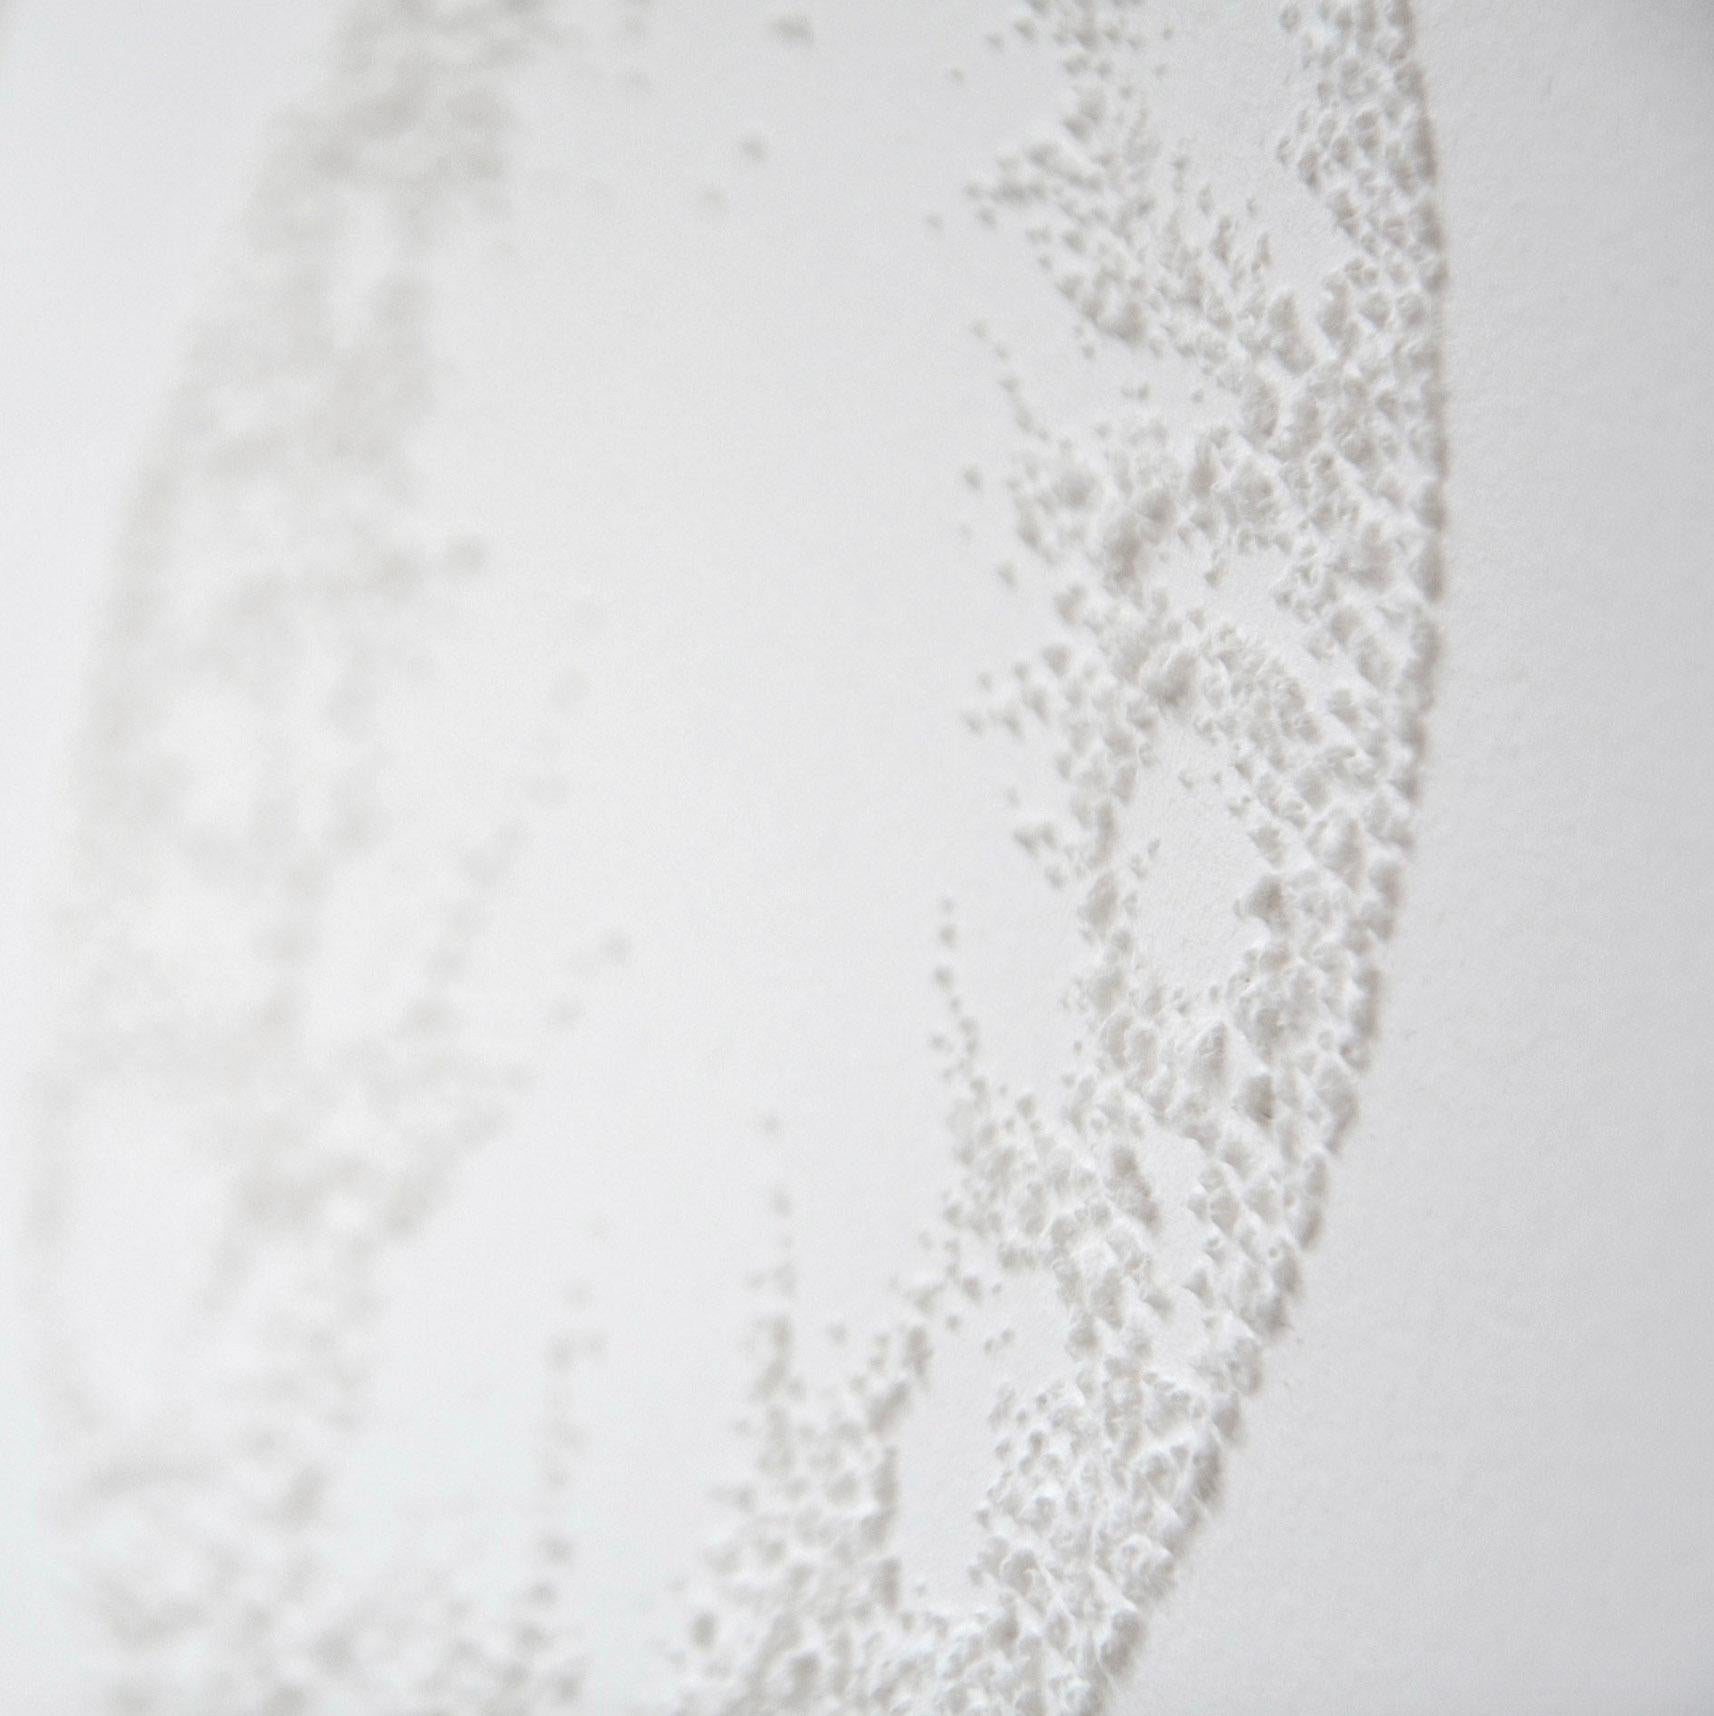 Circle 2 - intricate white 3D abstract geometric drypoint drawing on paper  - Sculpture by Antonin Anzil